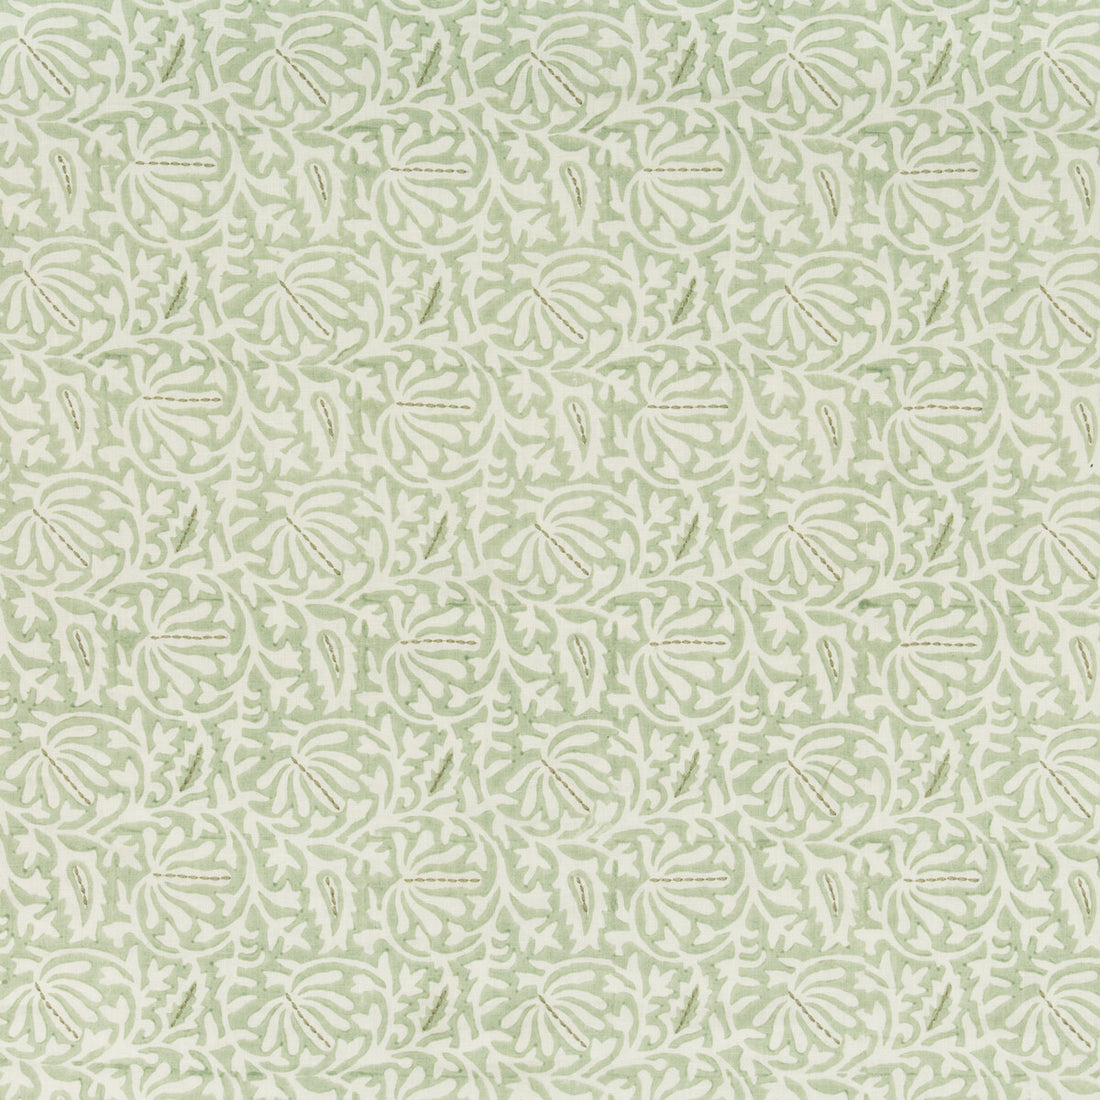 Laine Print fabric in mist color - pattern 2017169.123.0 - by Lee Jofa in the Westport collection